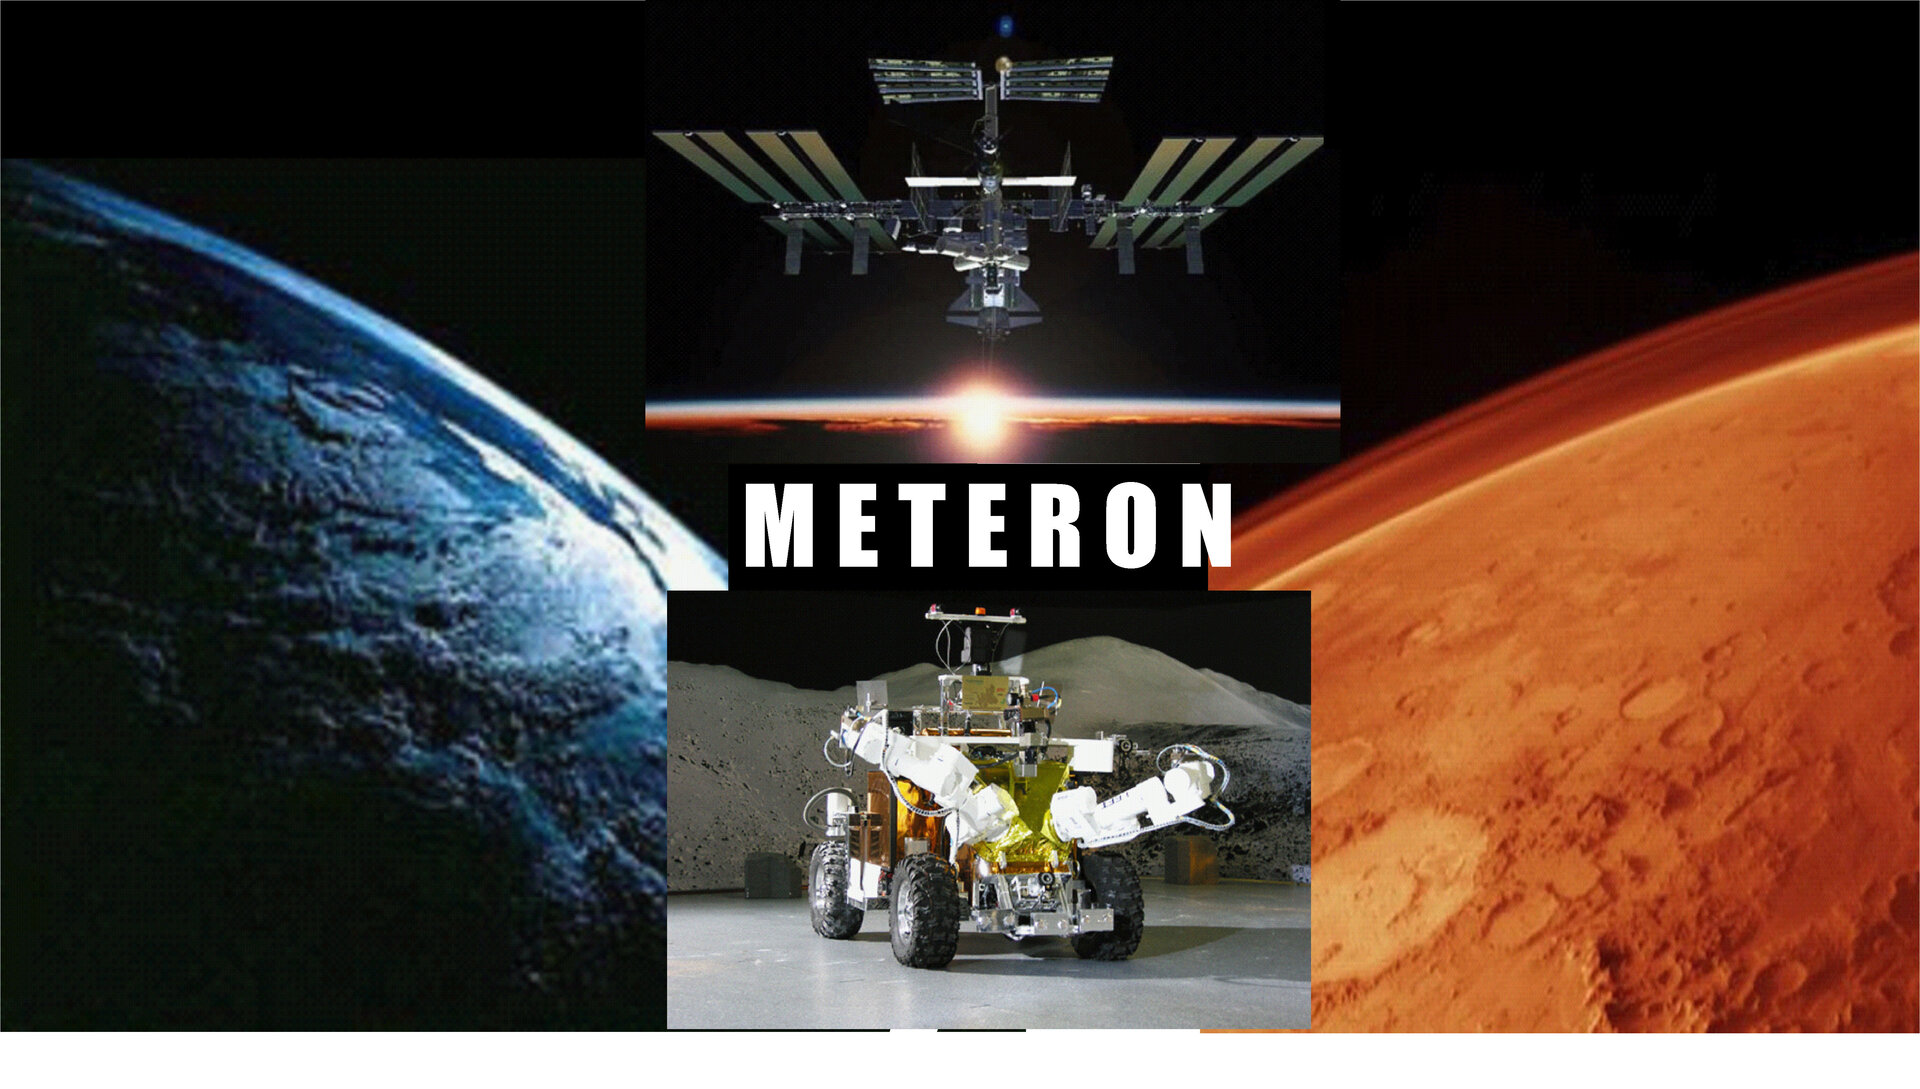 METERON (Multipurpose End-To-End Robotic Operations Network)